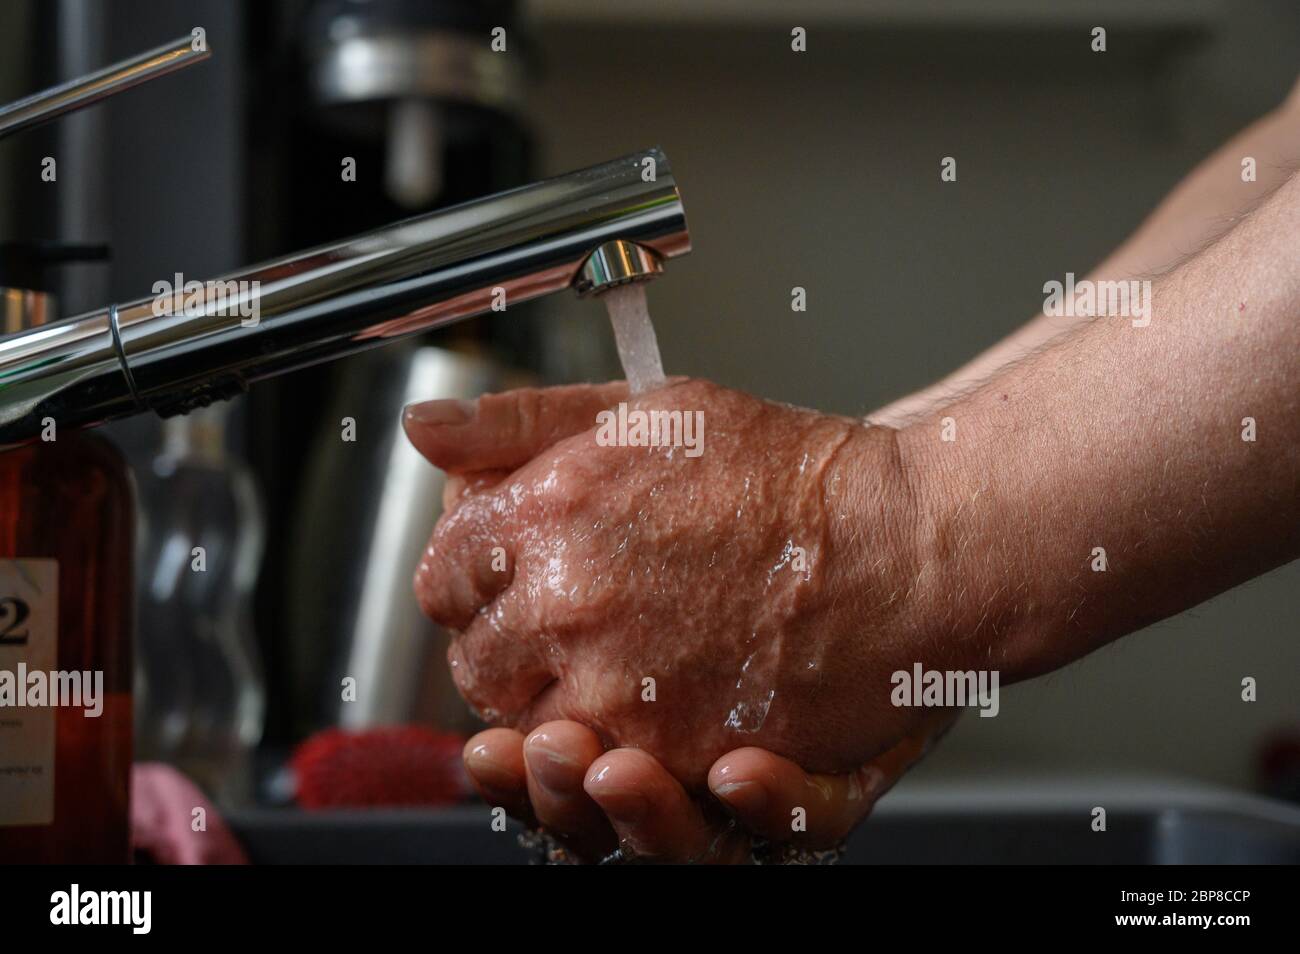 Man washing his hands under running water from the faucet in a hand basin or sink in a close up view conceptual of hygiene awareness for Covid-19 Stock Photo